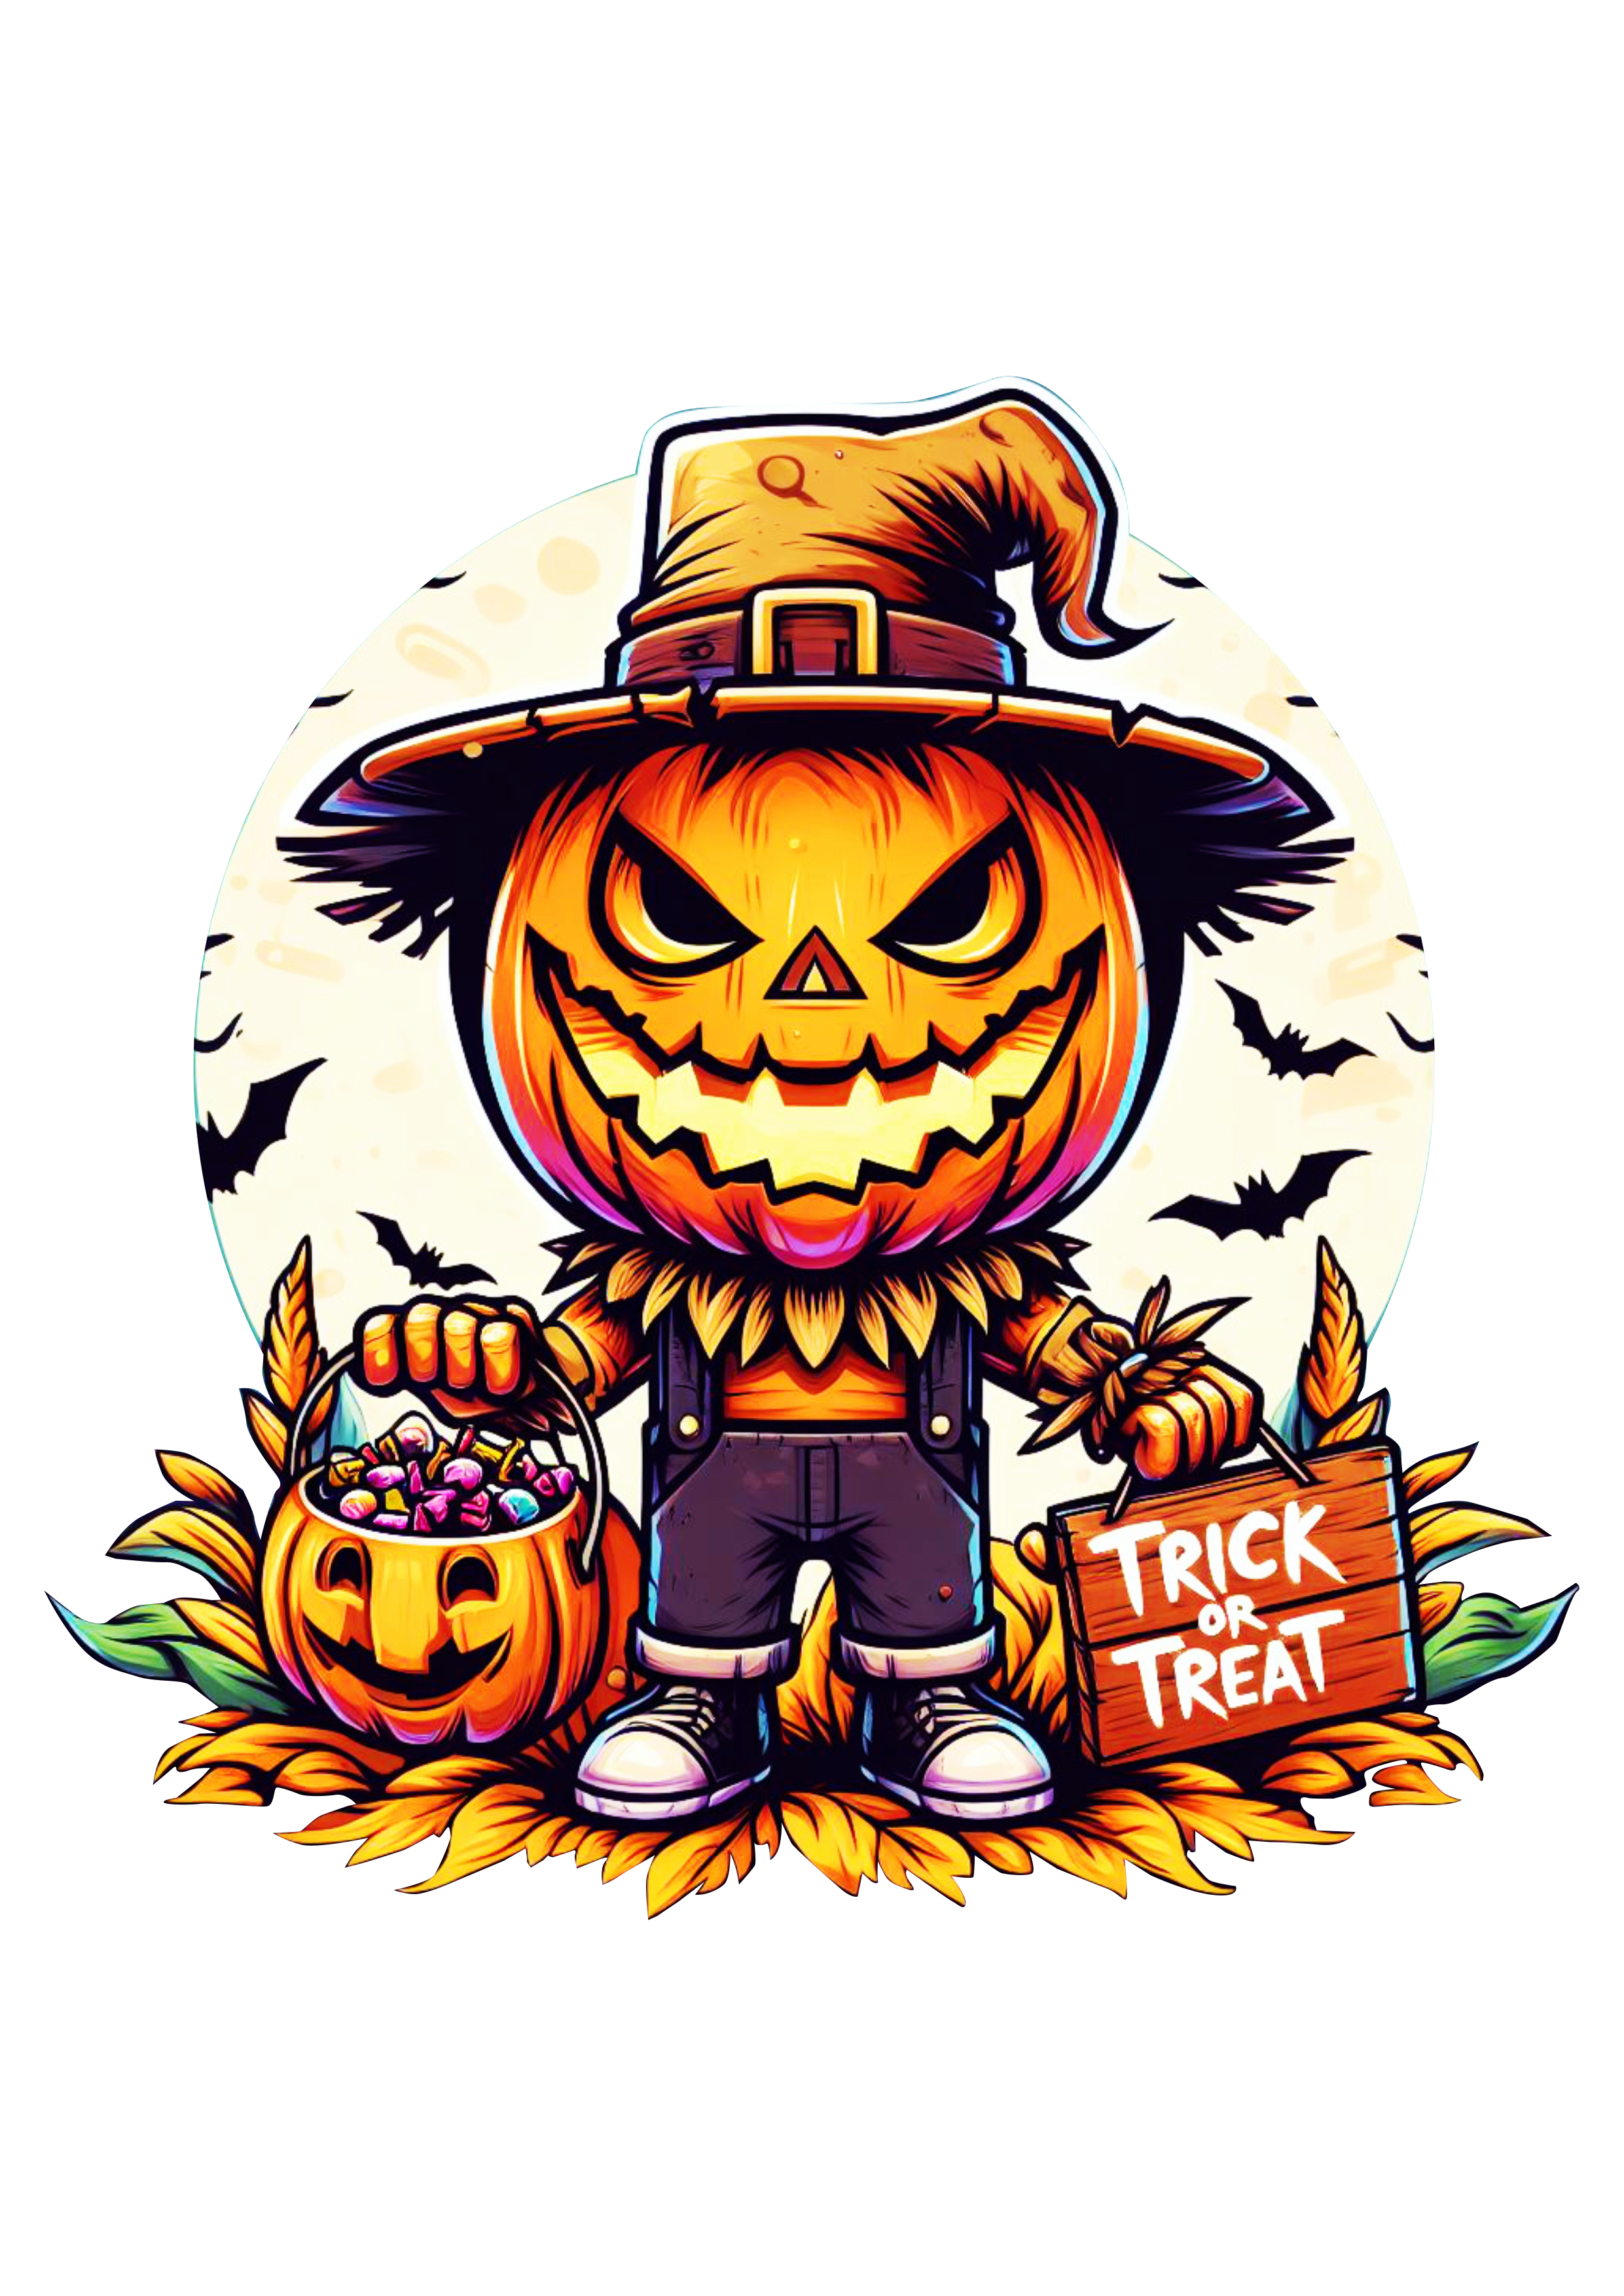 Trick or treat pumpkin halloween scary image full moon png